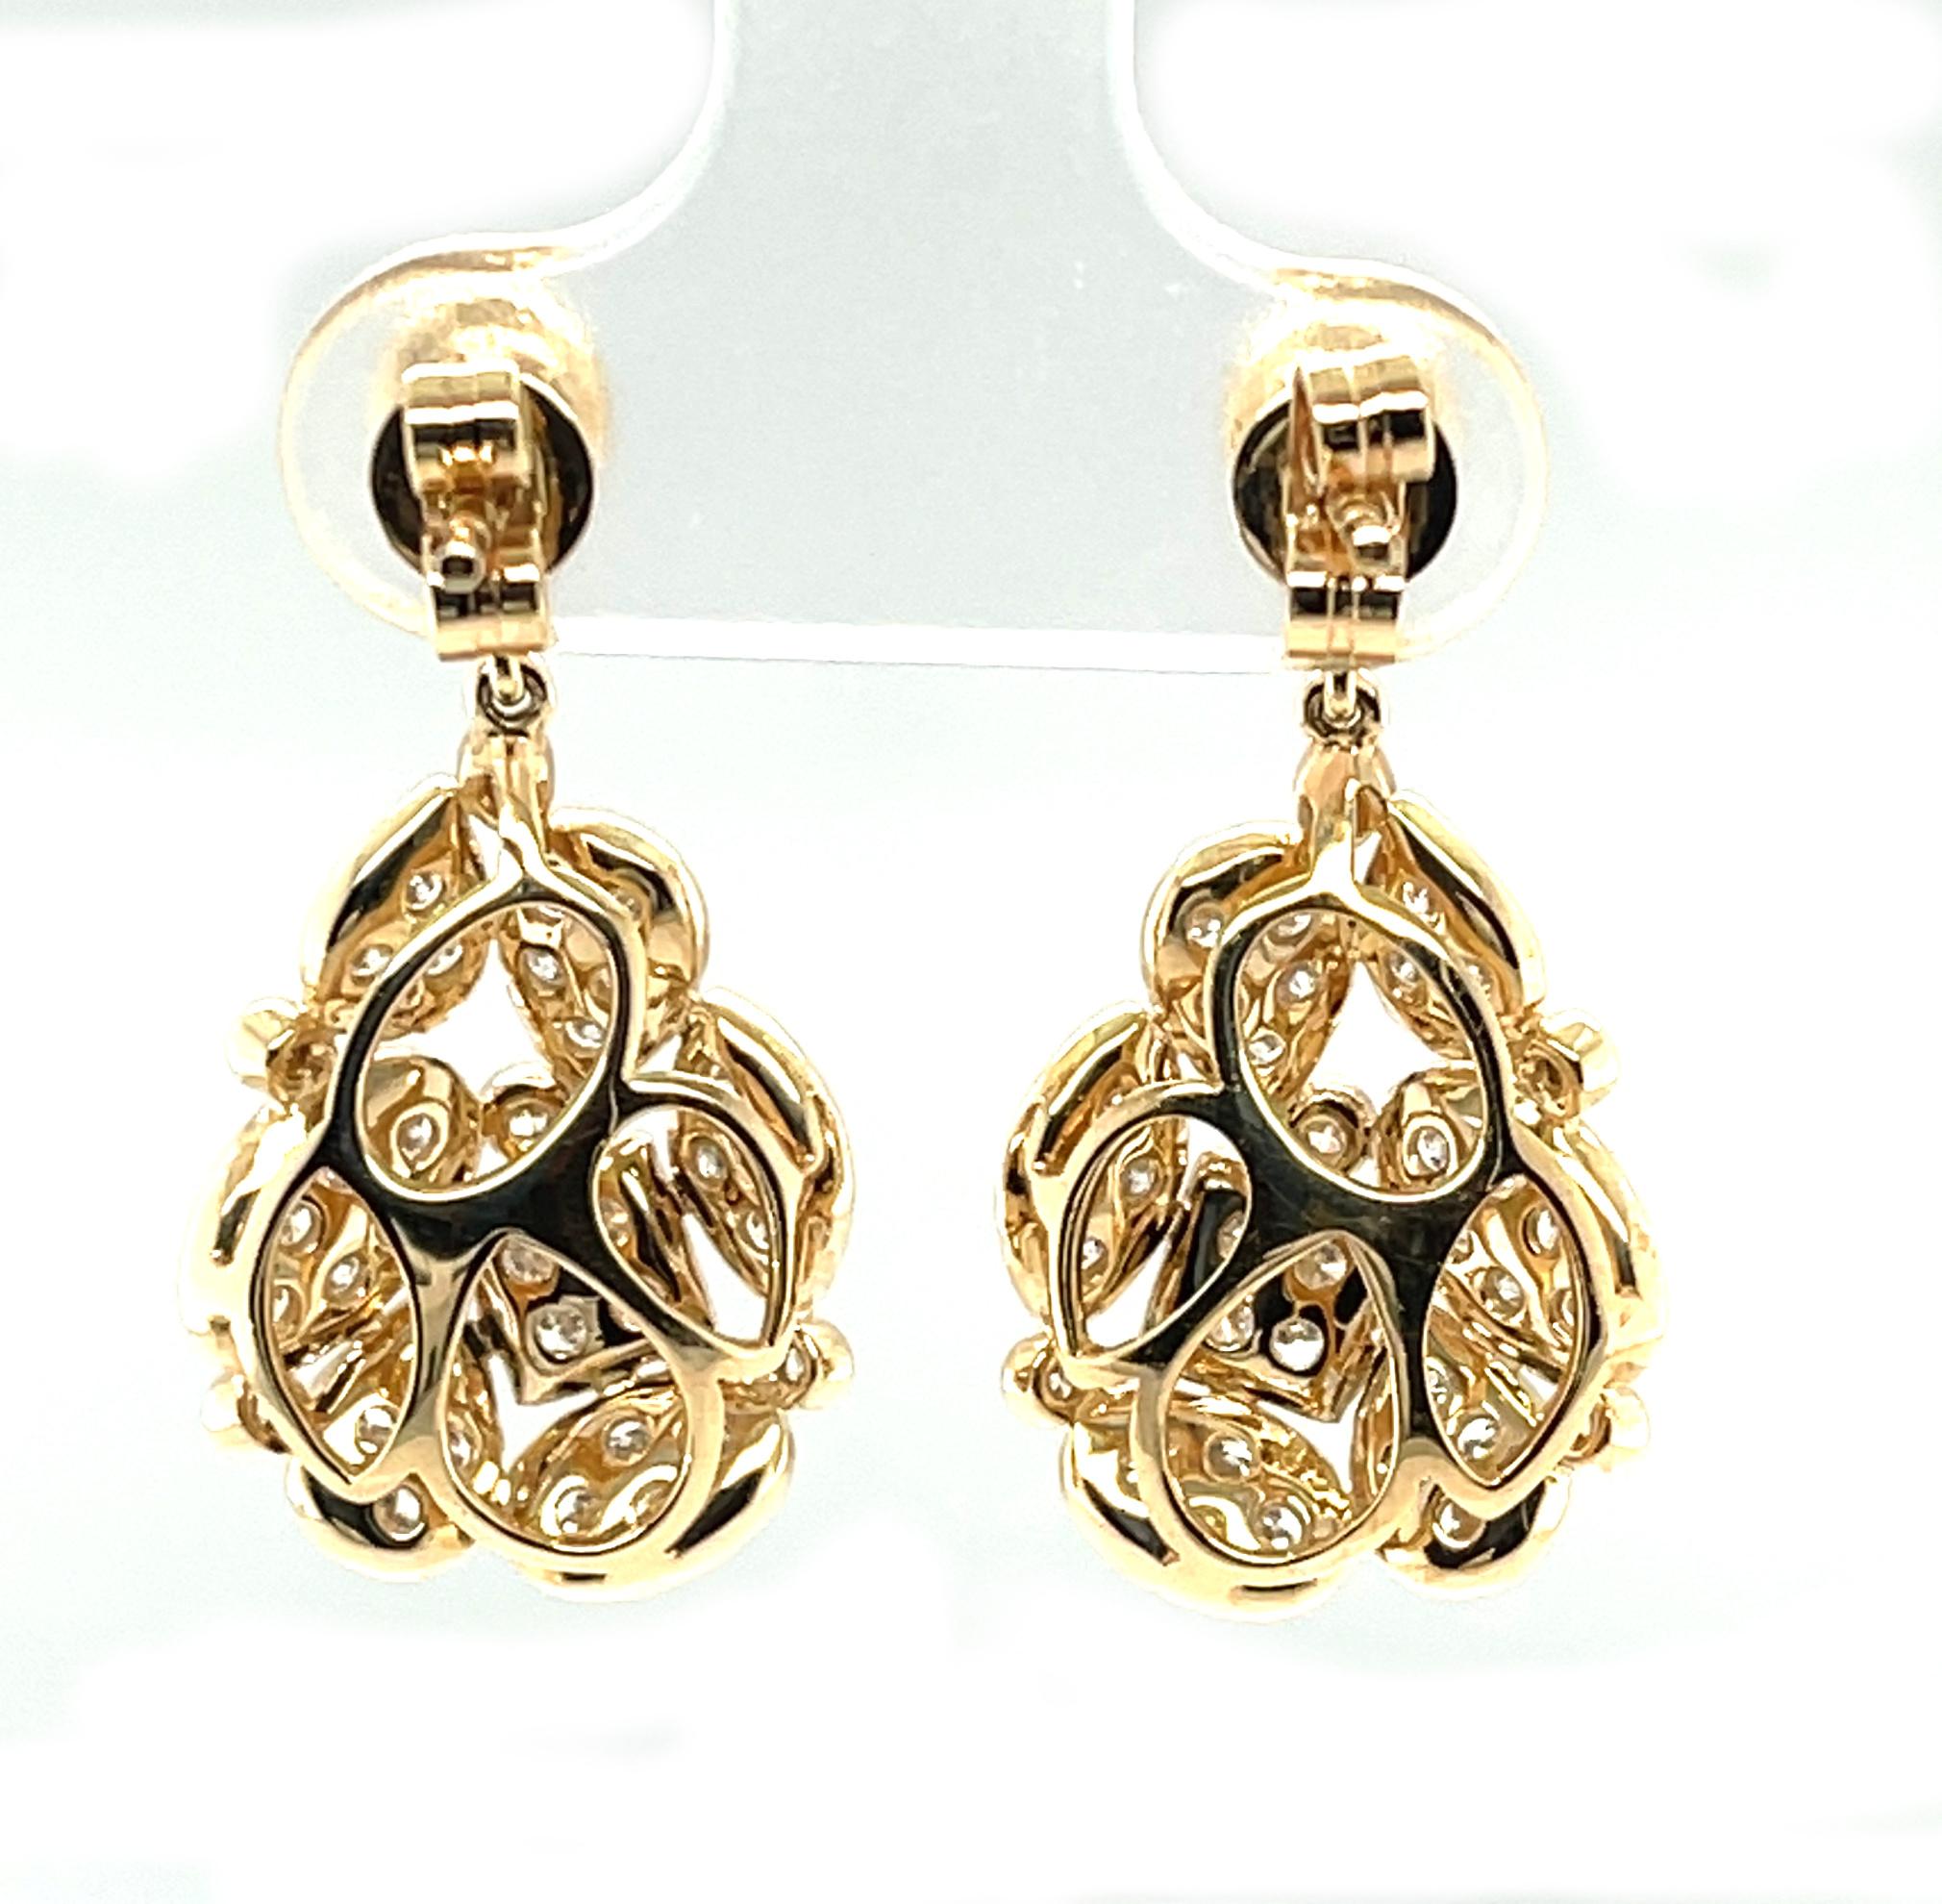 Mosaic Diamond Pave Drop Earrings in Yellow Gold, 1.26 Carat Total In New Condition For Sale In Los Angeles, CA